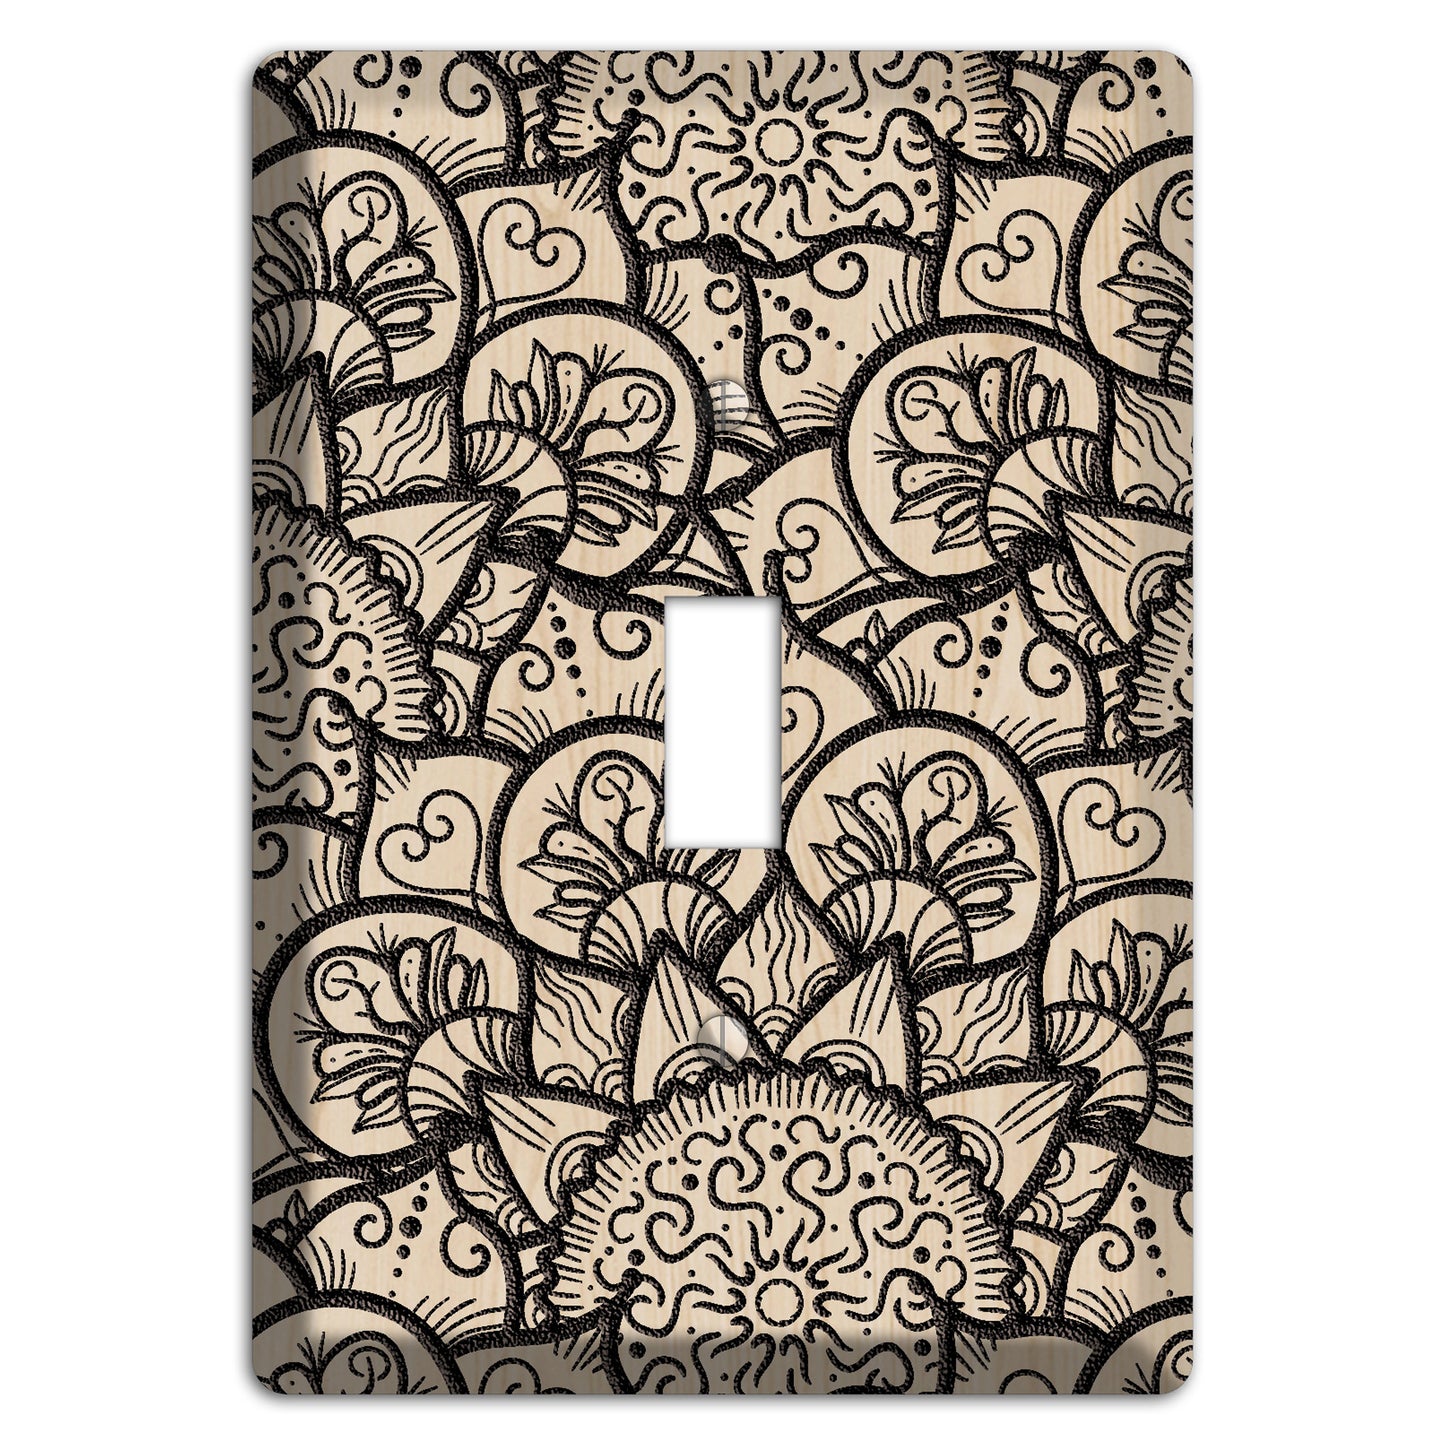 Mandala Black and White Style N Wood Lasered Cover Plates